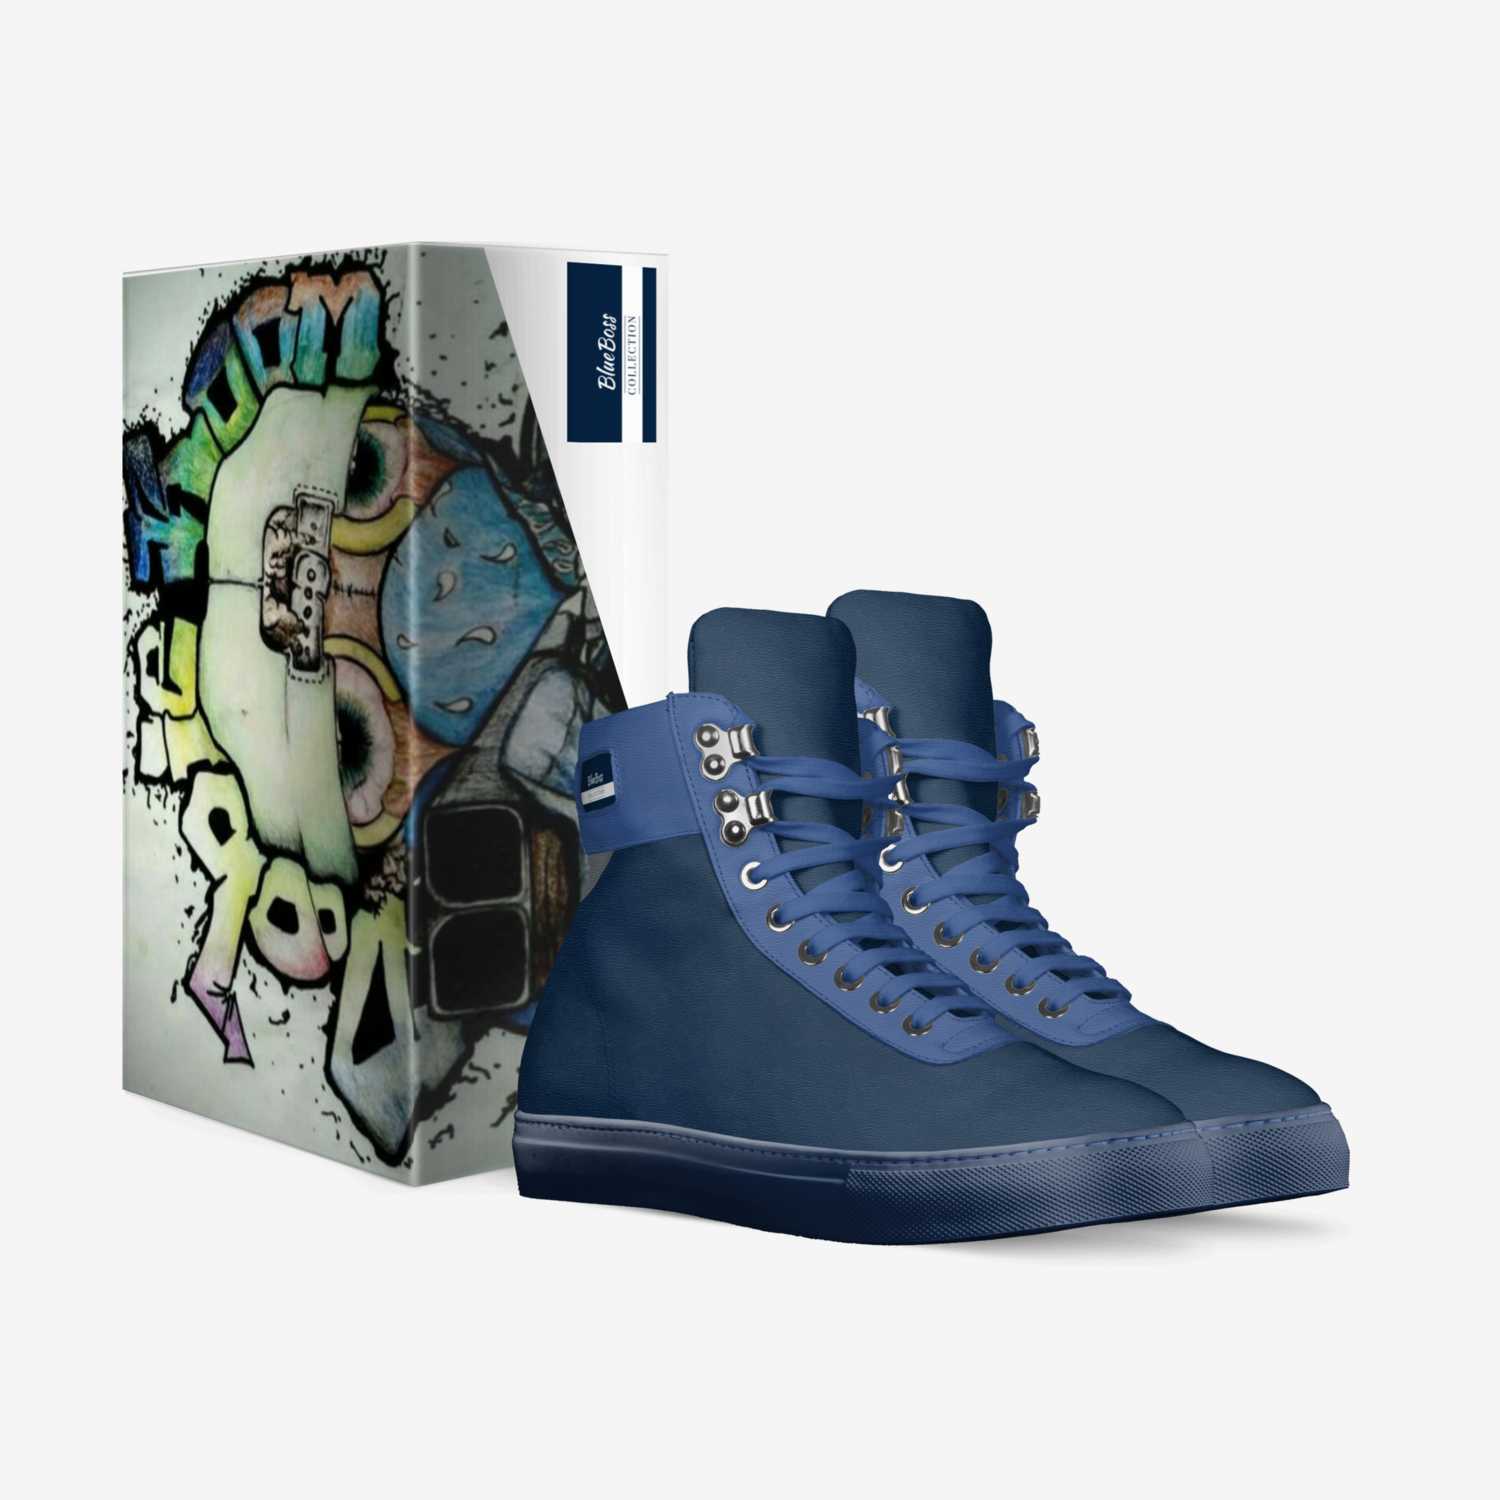 BlueBoss custom made in Italy shoes by Big Hippie | Box view